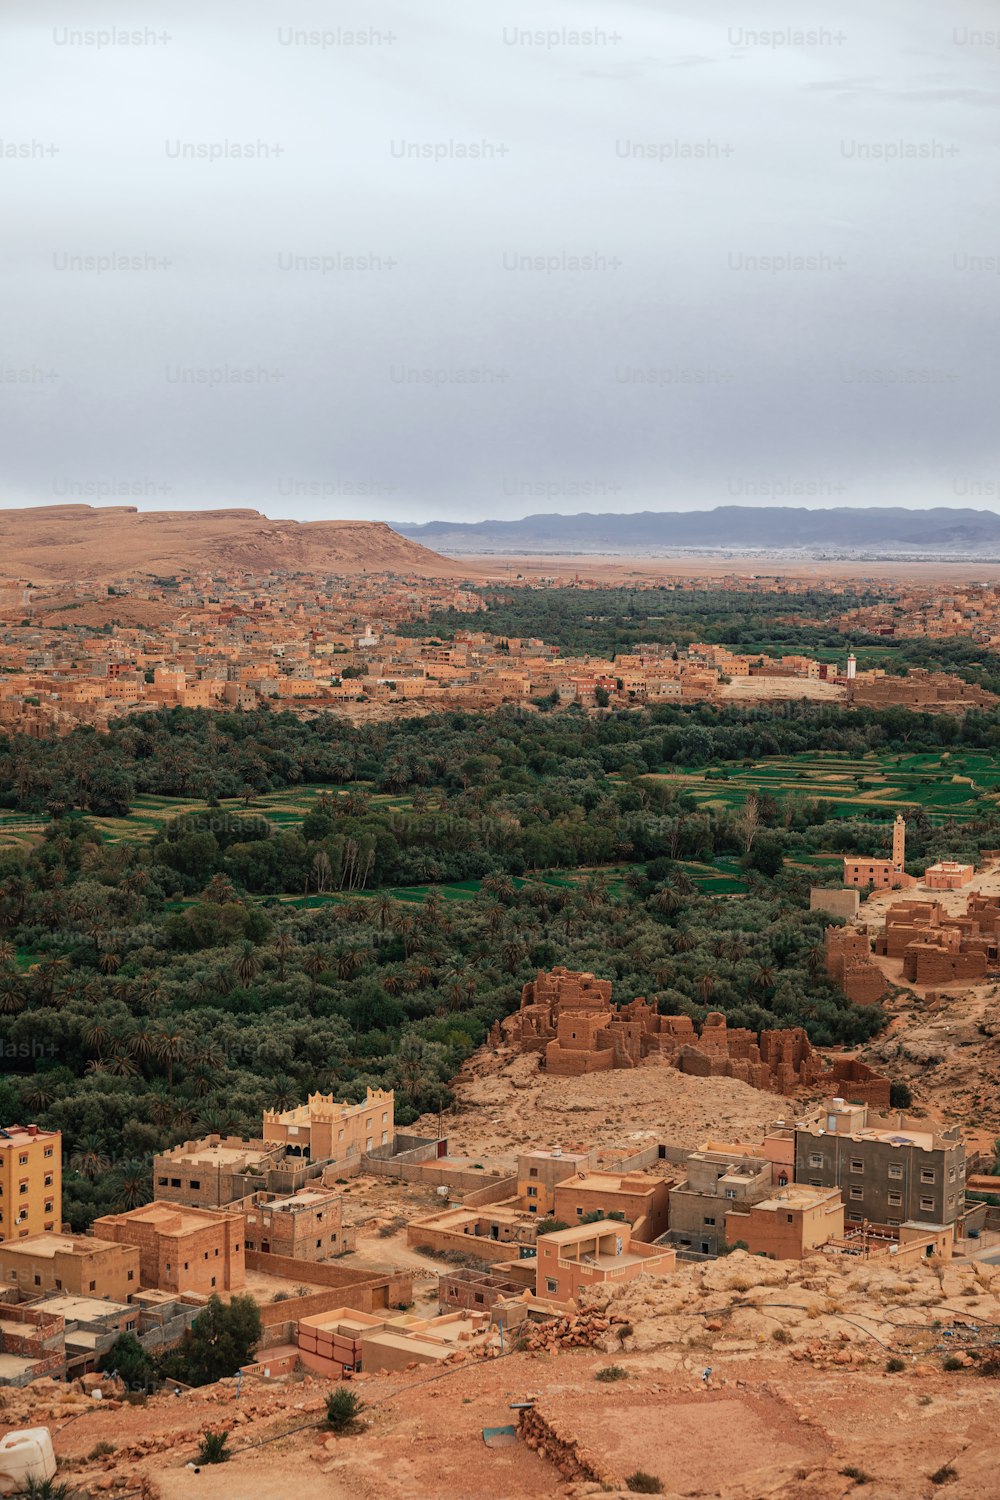 a view of a small village in the middle of a desert